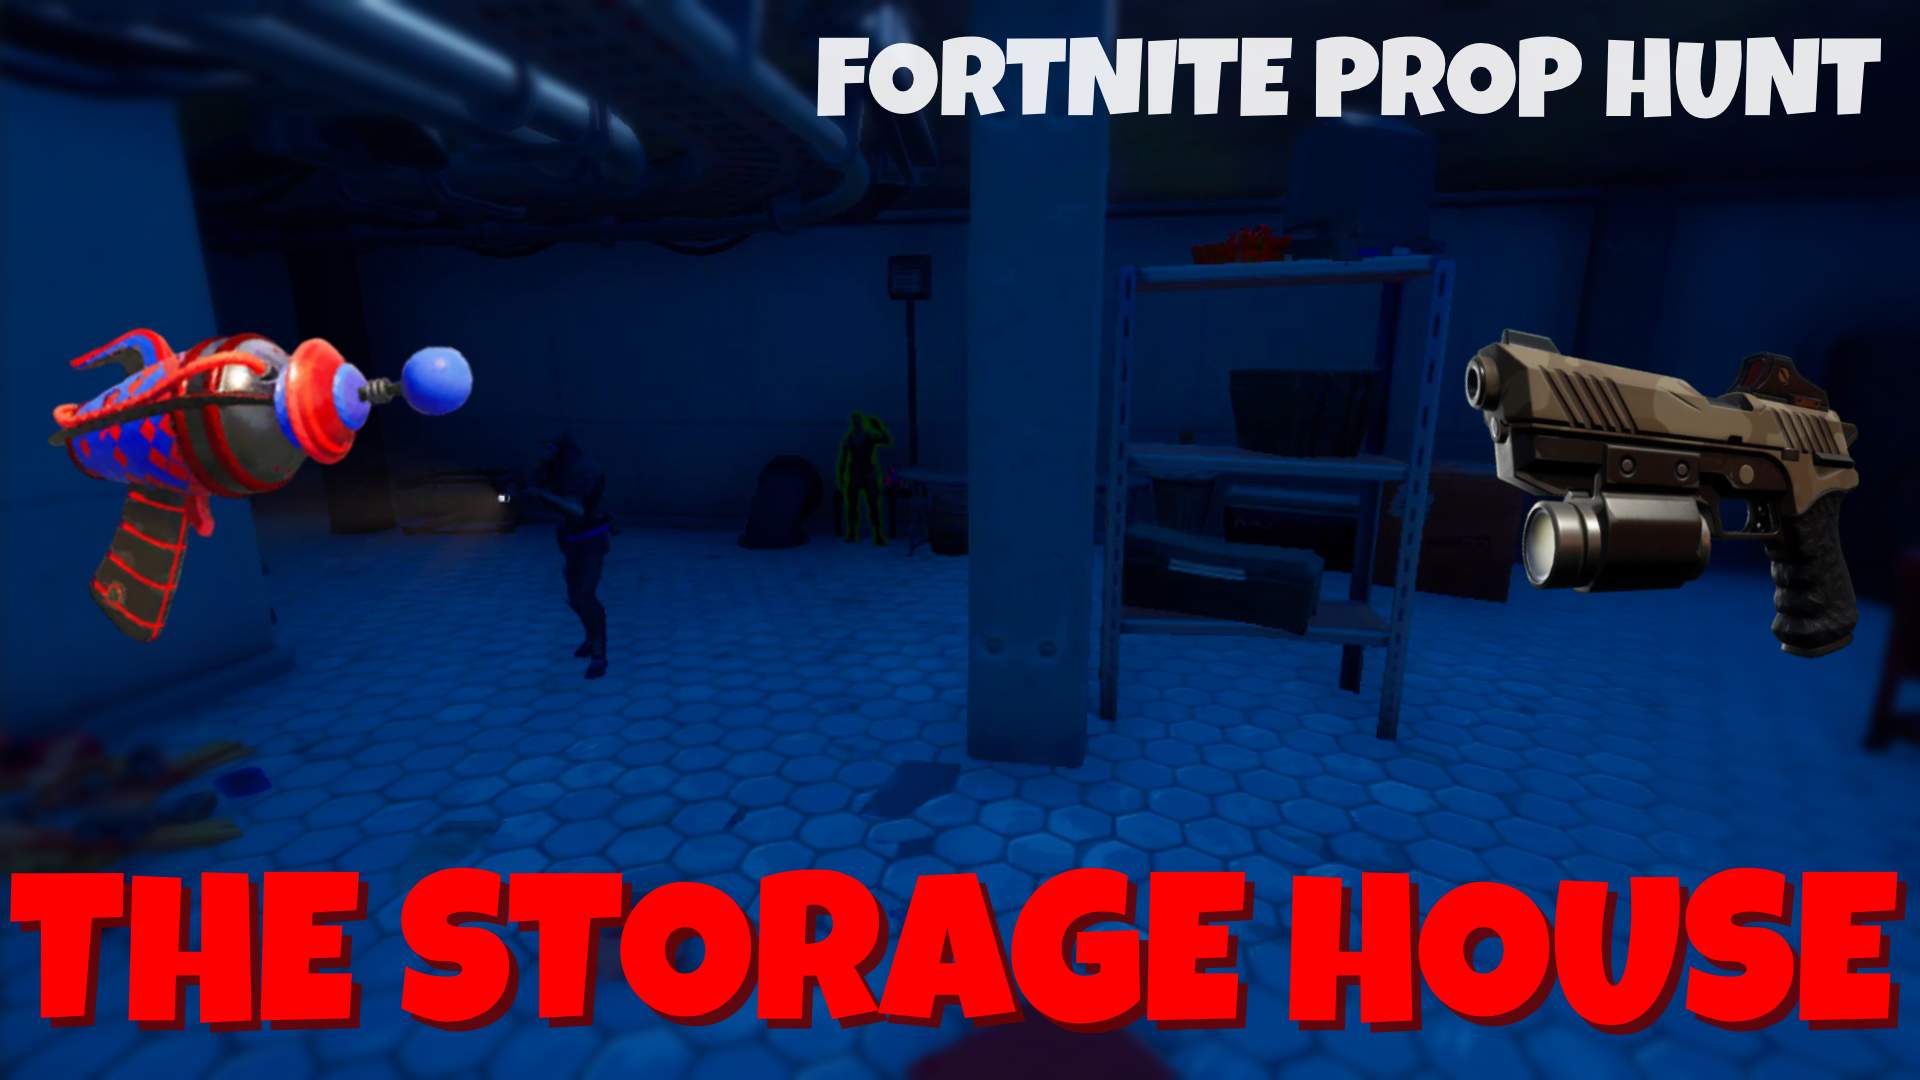 THE STORAGE HOUSE - HORROR PROP HUNT image 2